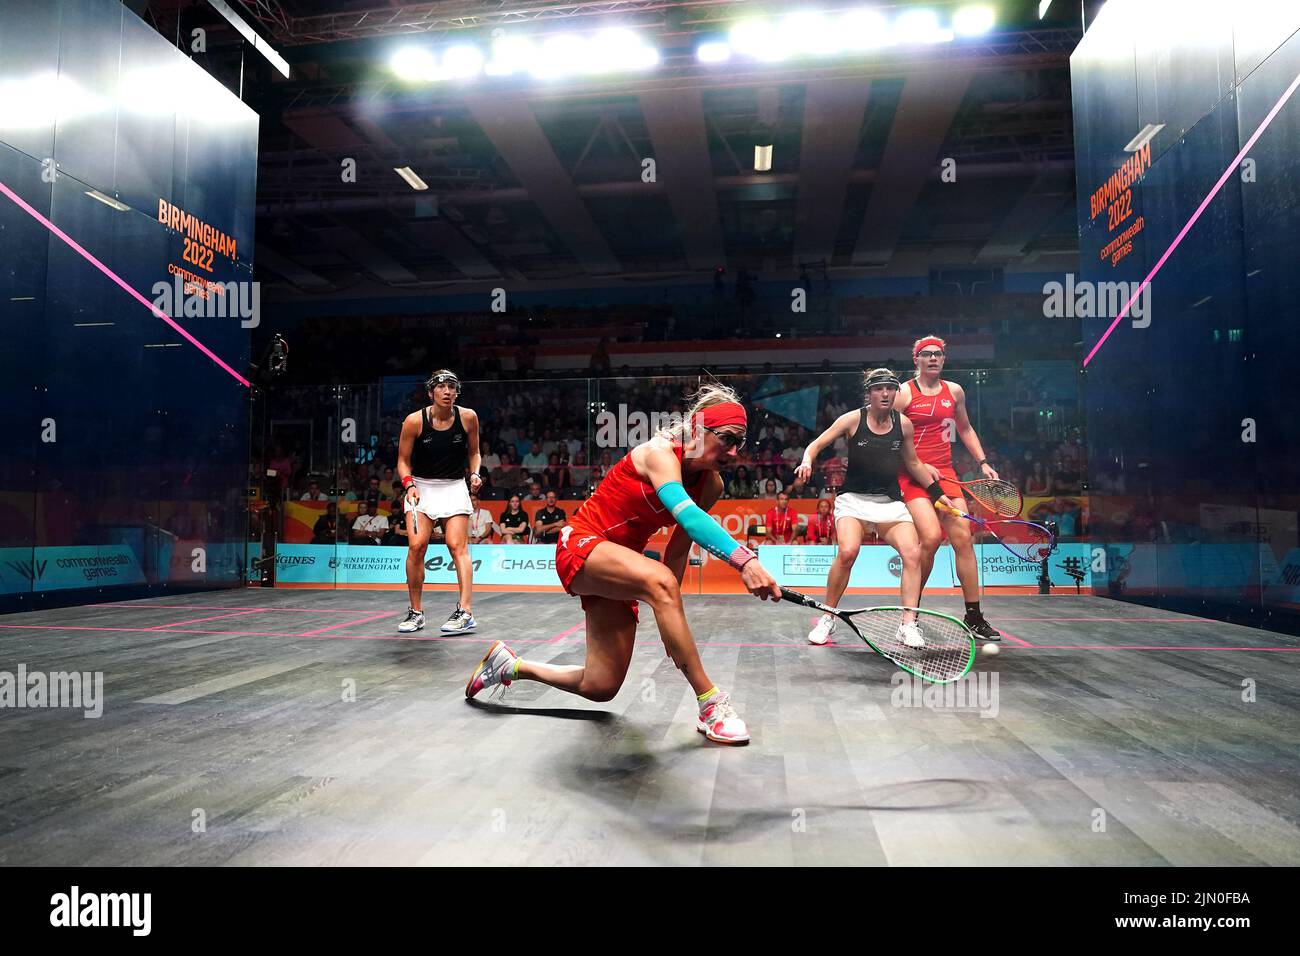 England's Sarah-Jane Perry and Alison Waters in action in the Women's Squash Doubled Gold medal match against New Zealand's Amanda Landers-Murphy and Joelle King at the University of Birmingham Hockey and Squash Centre on day eleven of the 2022 Commonwealth Games in Birmingham. Picture date: Monday August 8, 2022. Stock Photo